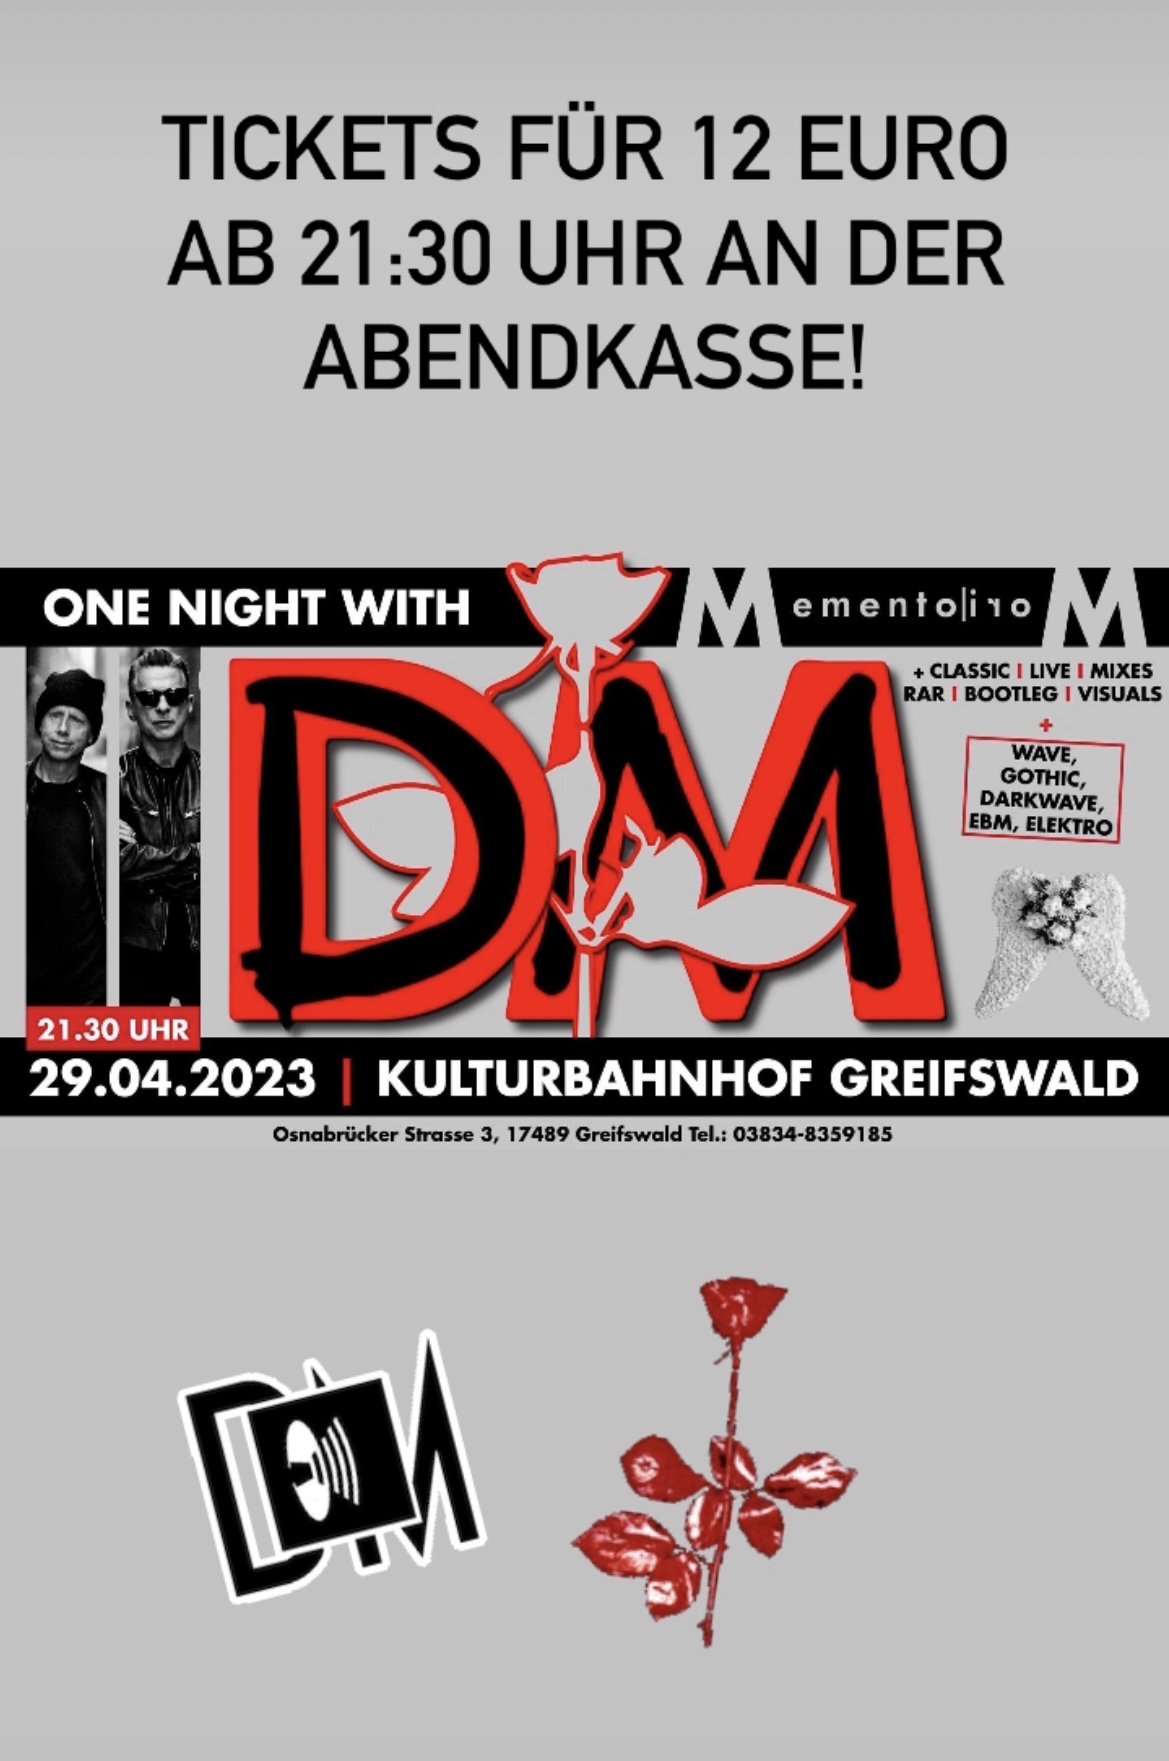 One Night with Depeche Mode